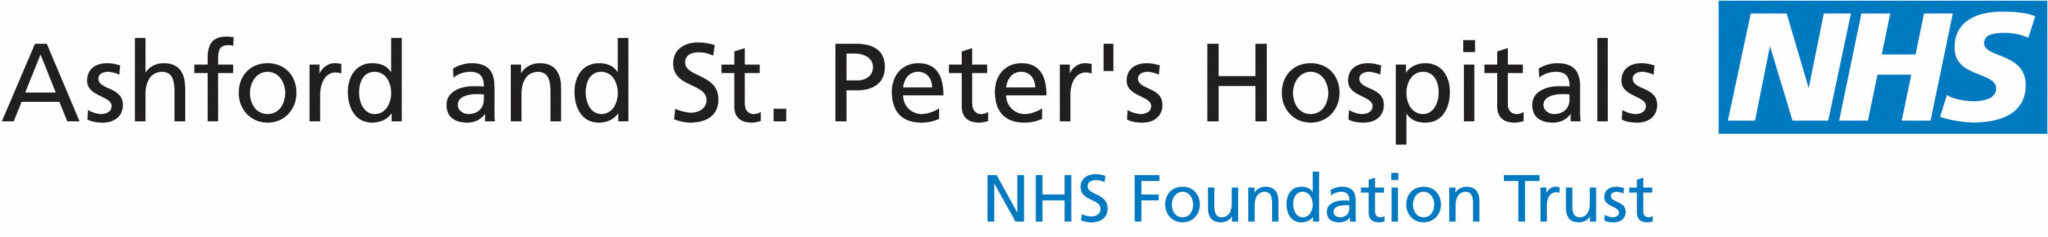 Ashford and St Peters NHS Hospital Trust